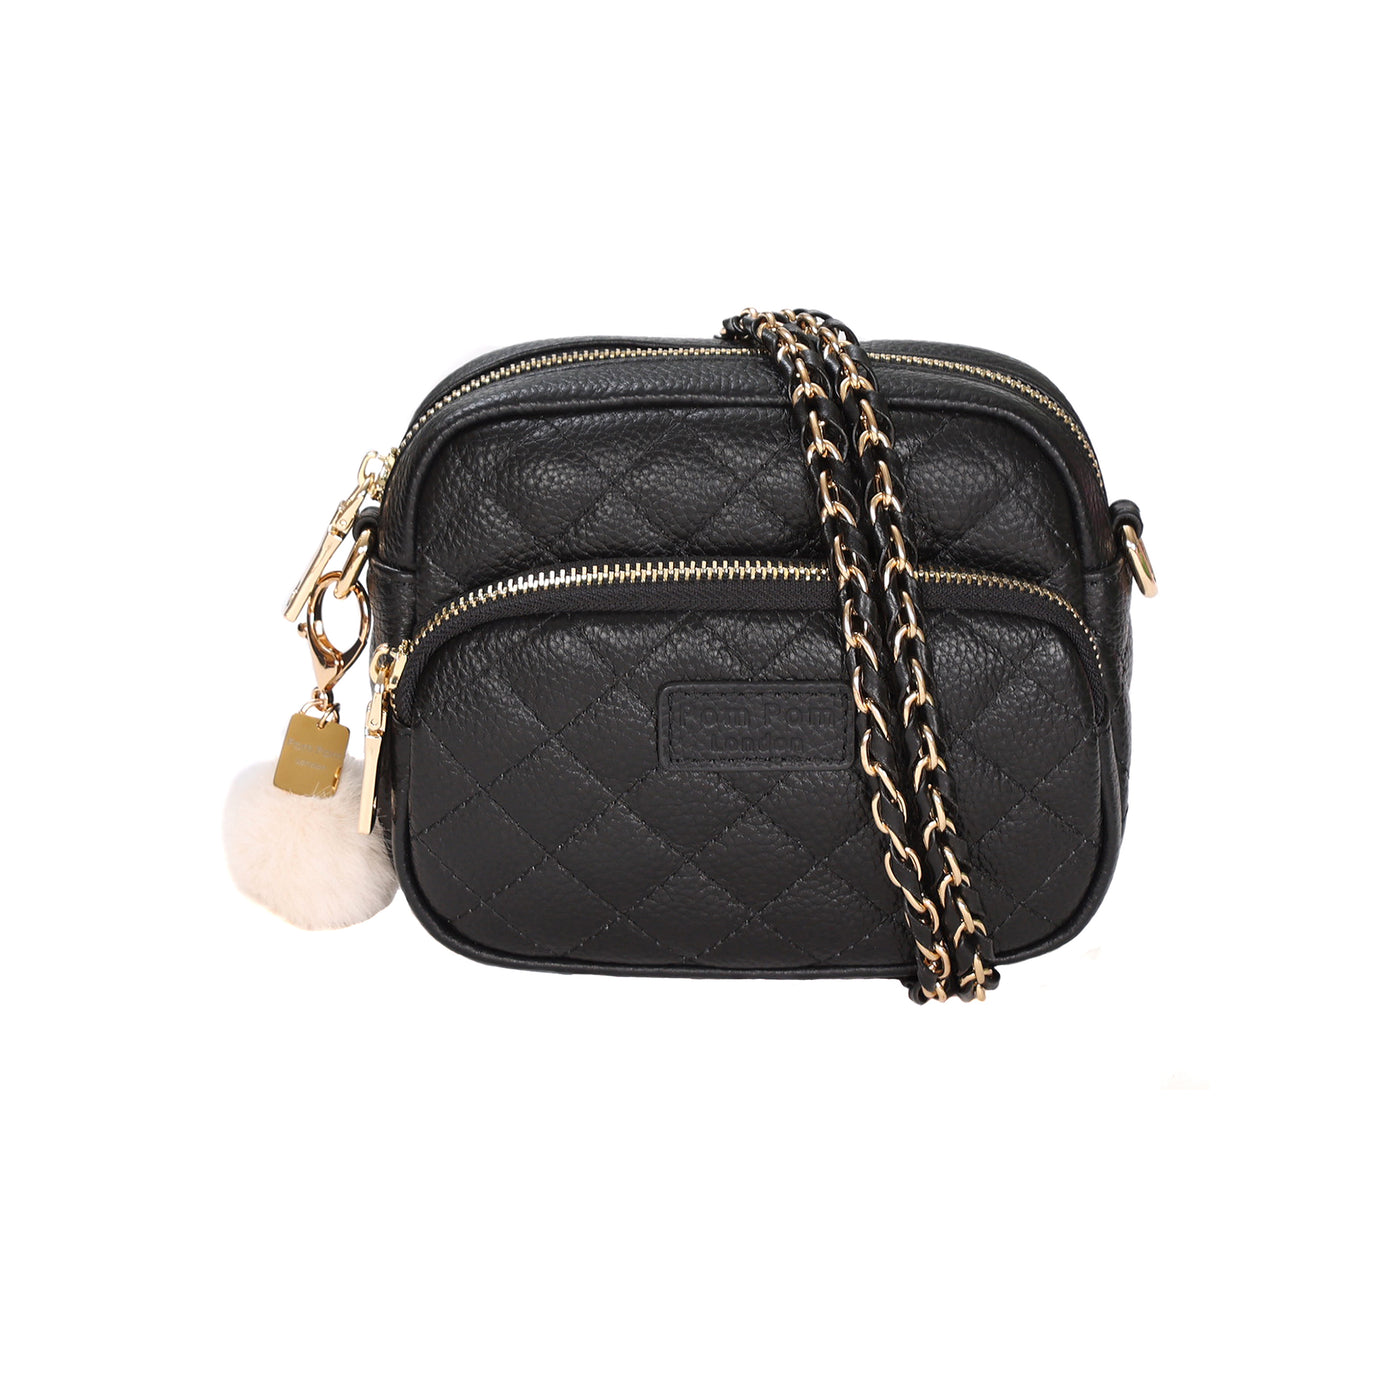 Quilted Mayfair MINI Bag Black & Accessories - Pom Pom London